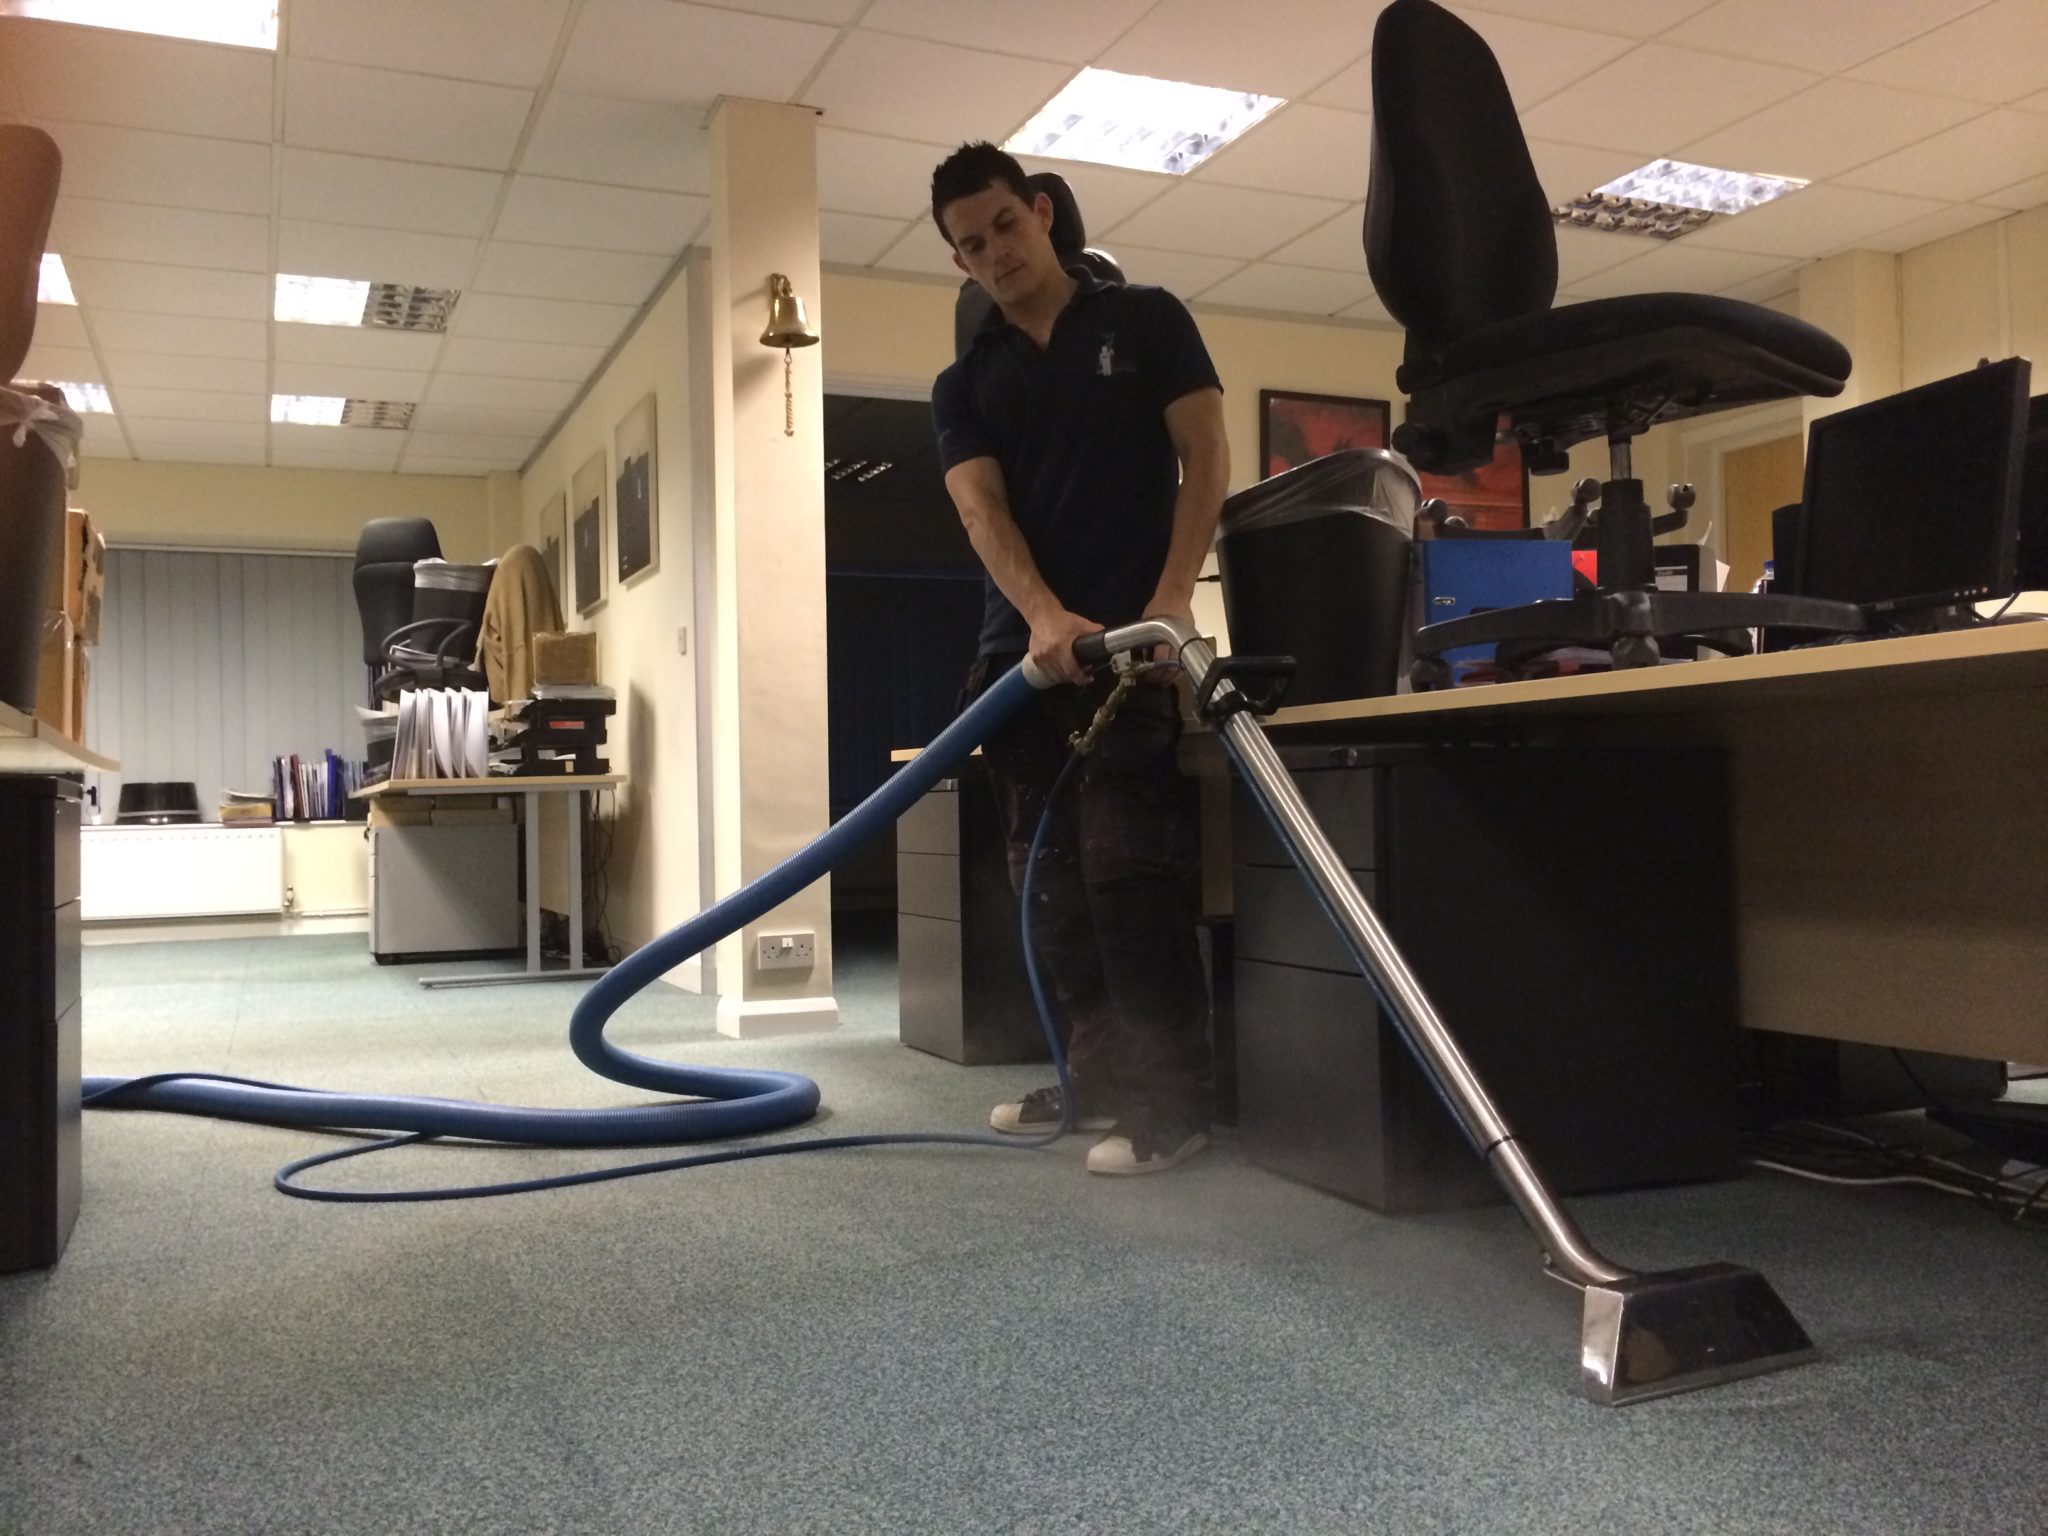 Office Carpet Cleaning Commercial Carpet Cleaning Services Cost 1 2048x1536 